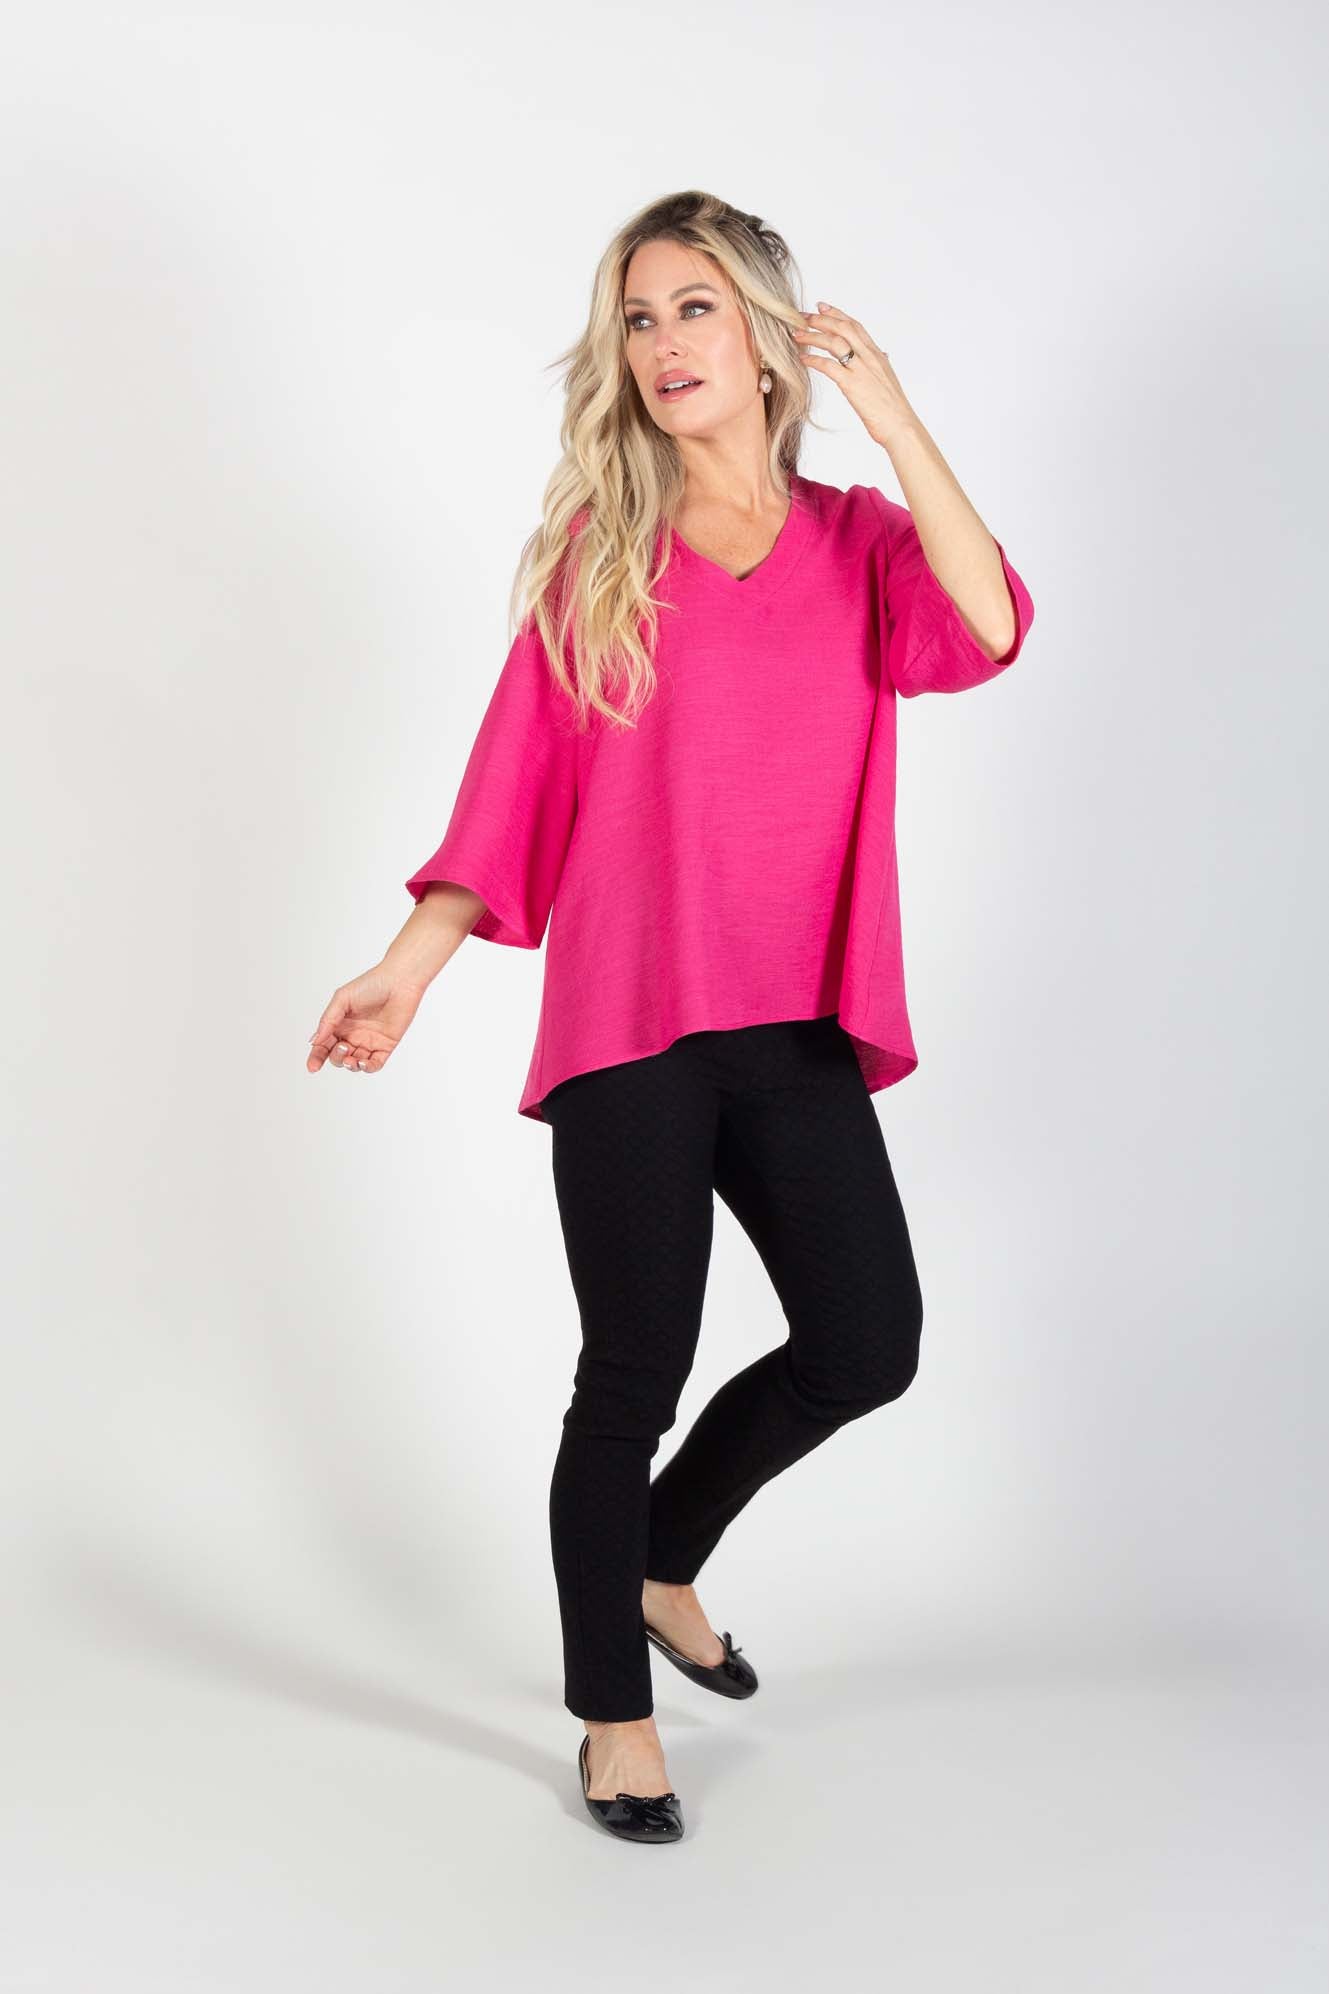 A woman wearing the Calypso Top by Pure Essence in Azalea with black pants standing in front of a white background